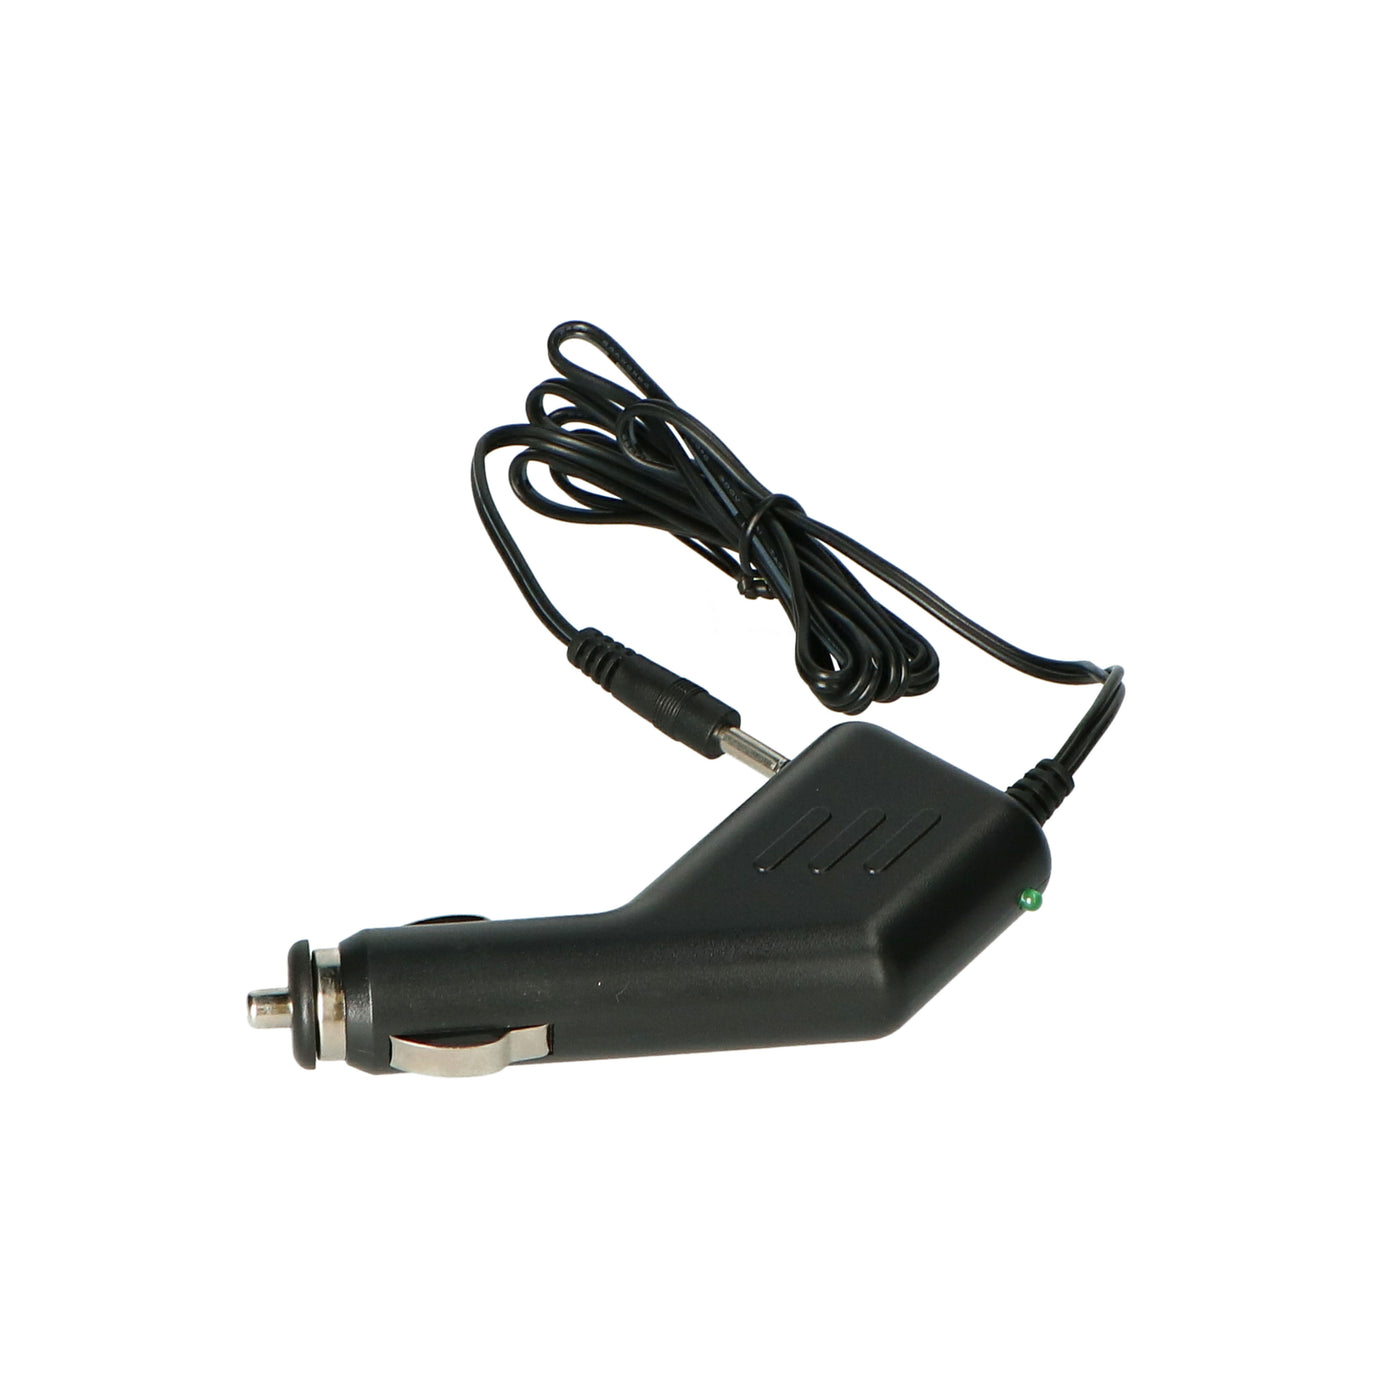 P000724 - Car adapter DVP single connection